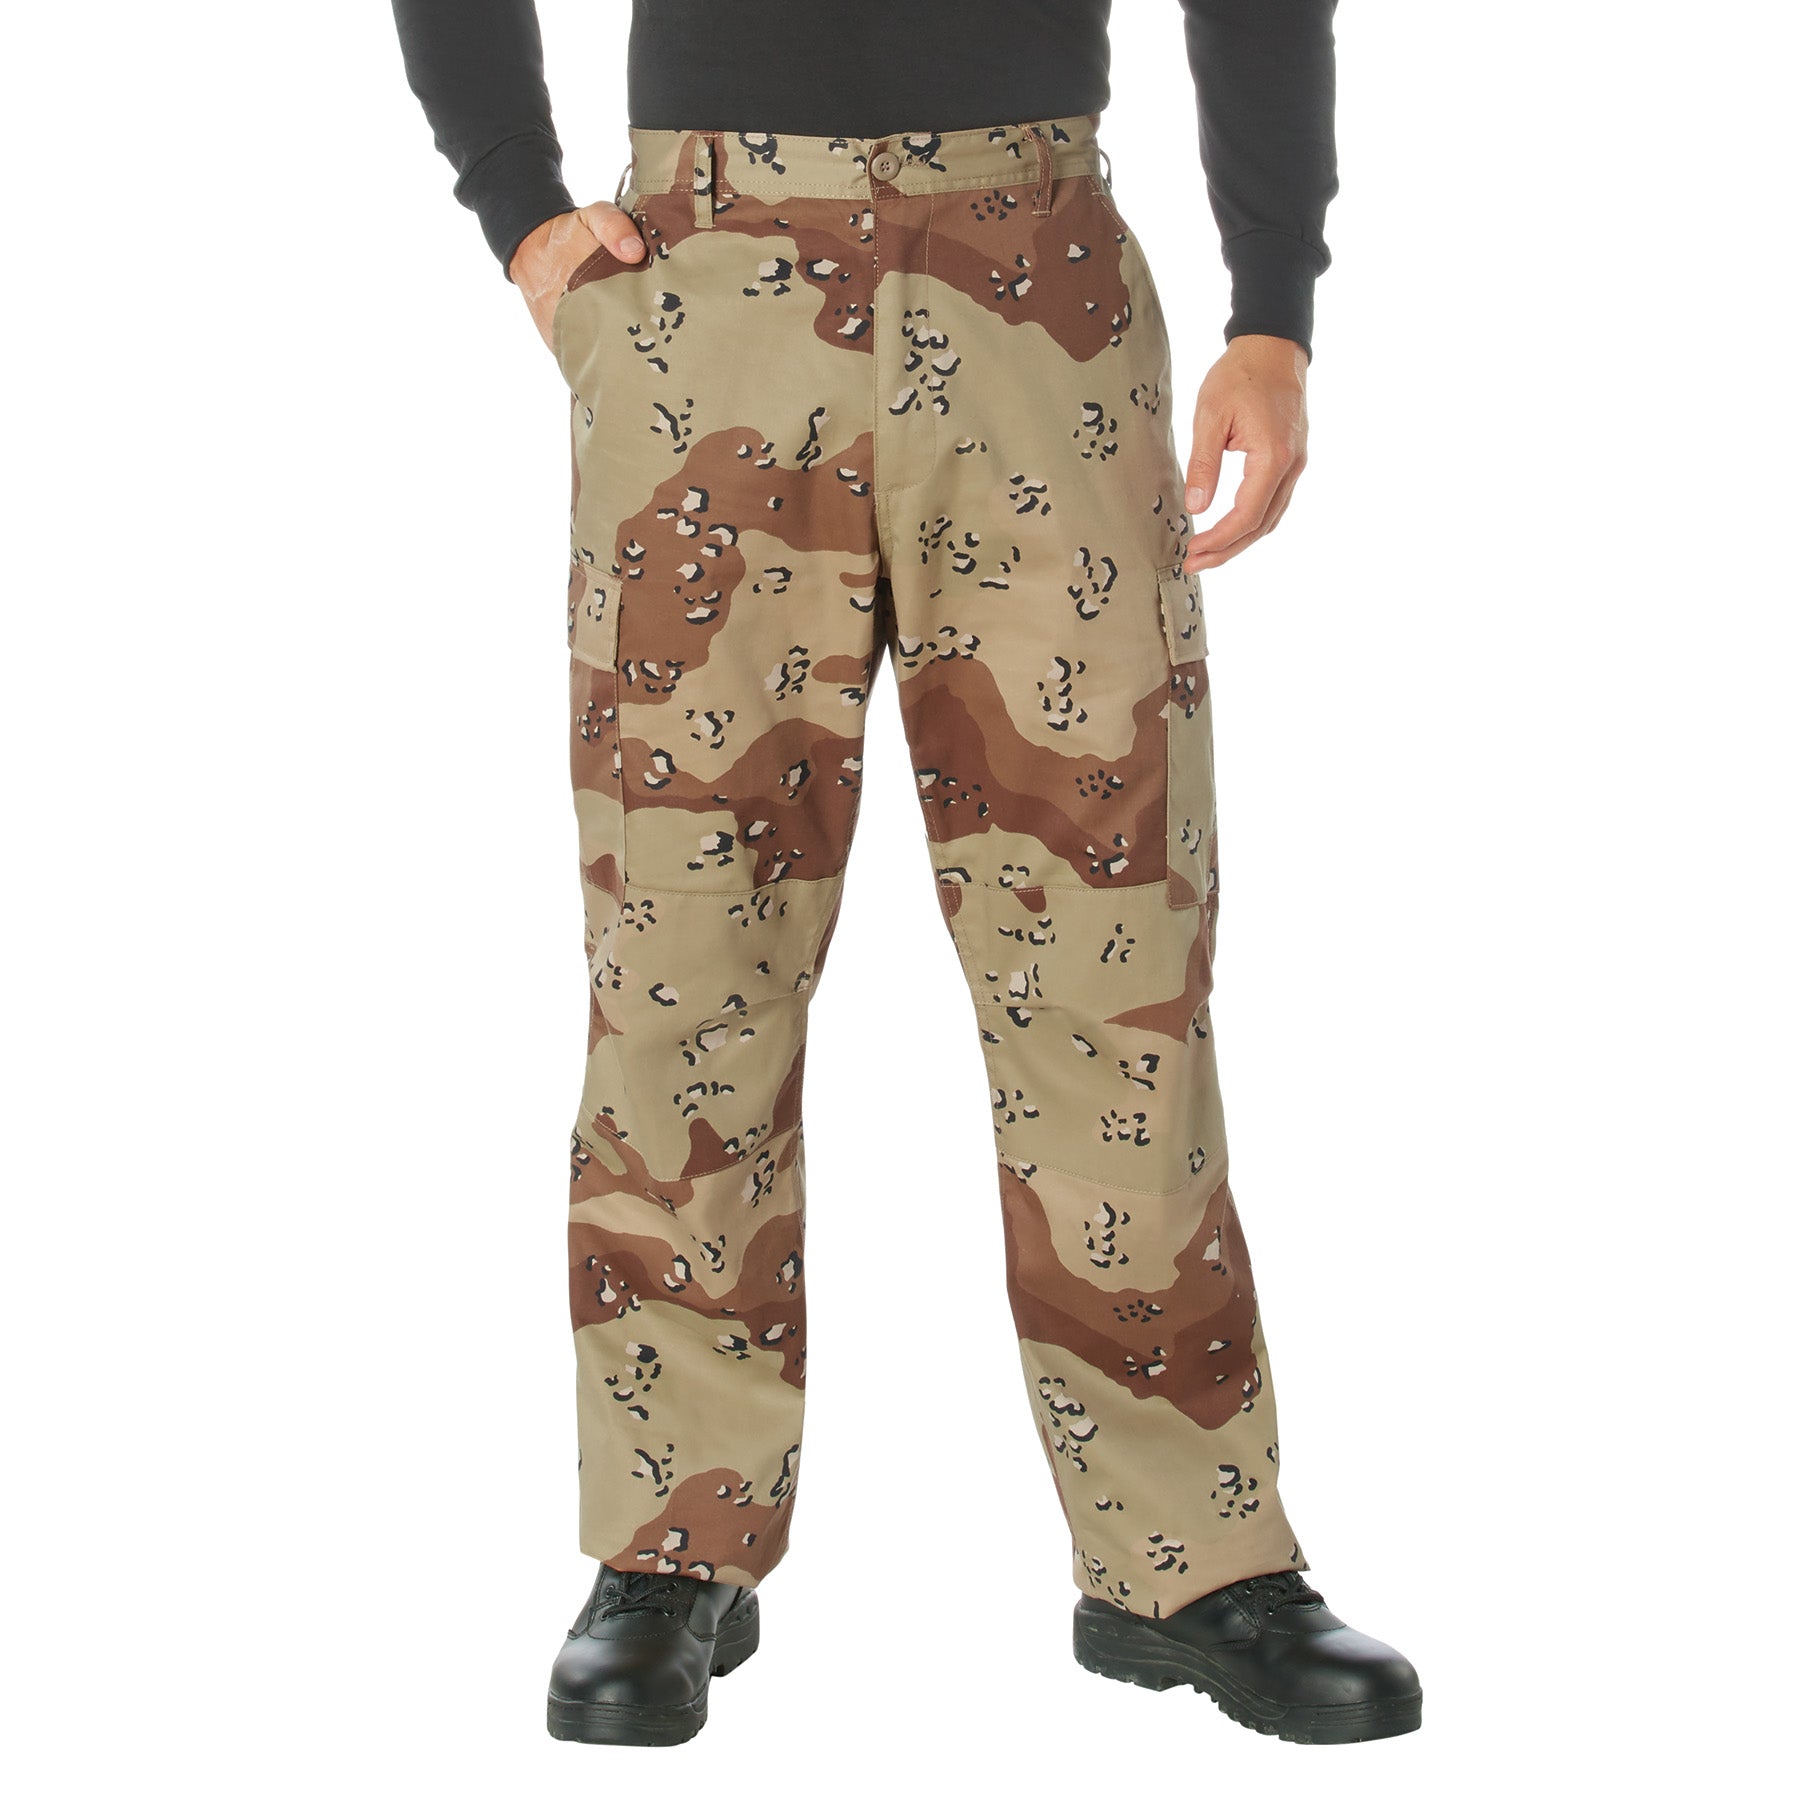 [Relaxed Fit Zipper Fly] Camo Poly/Cotton Tactical BDU Pants